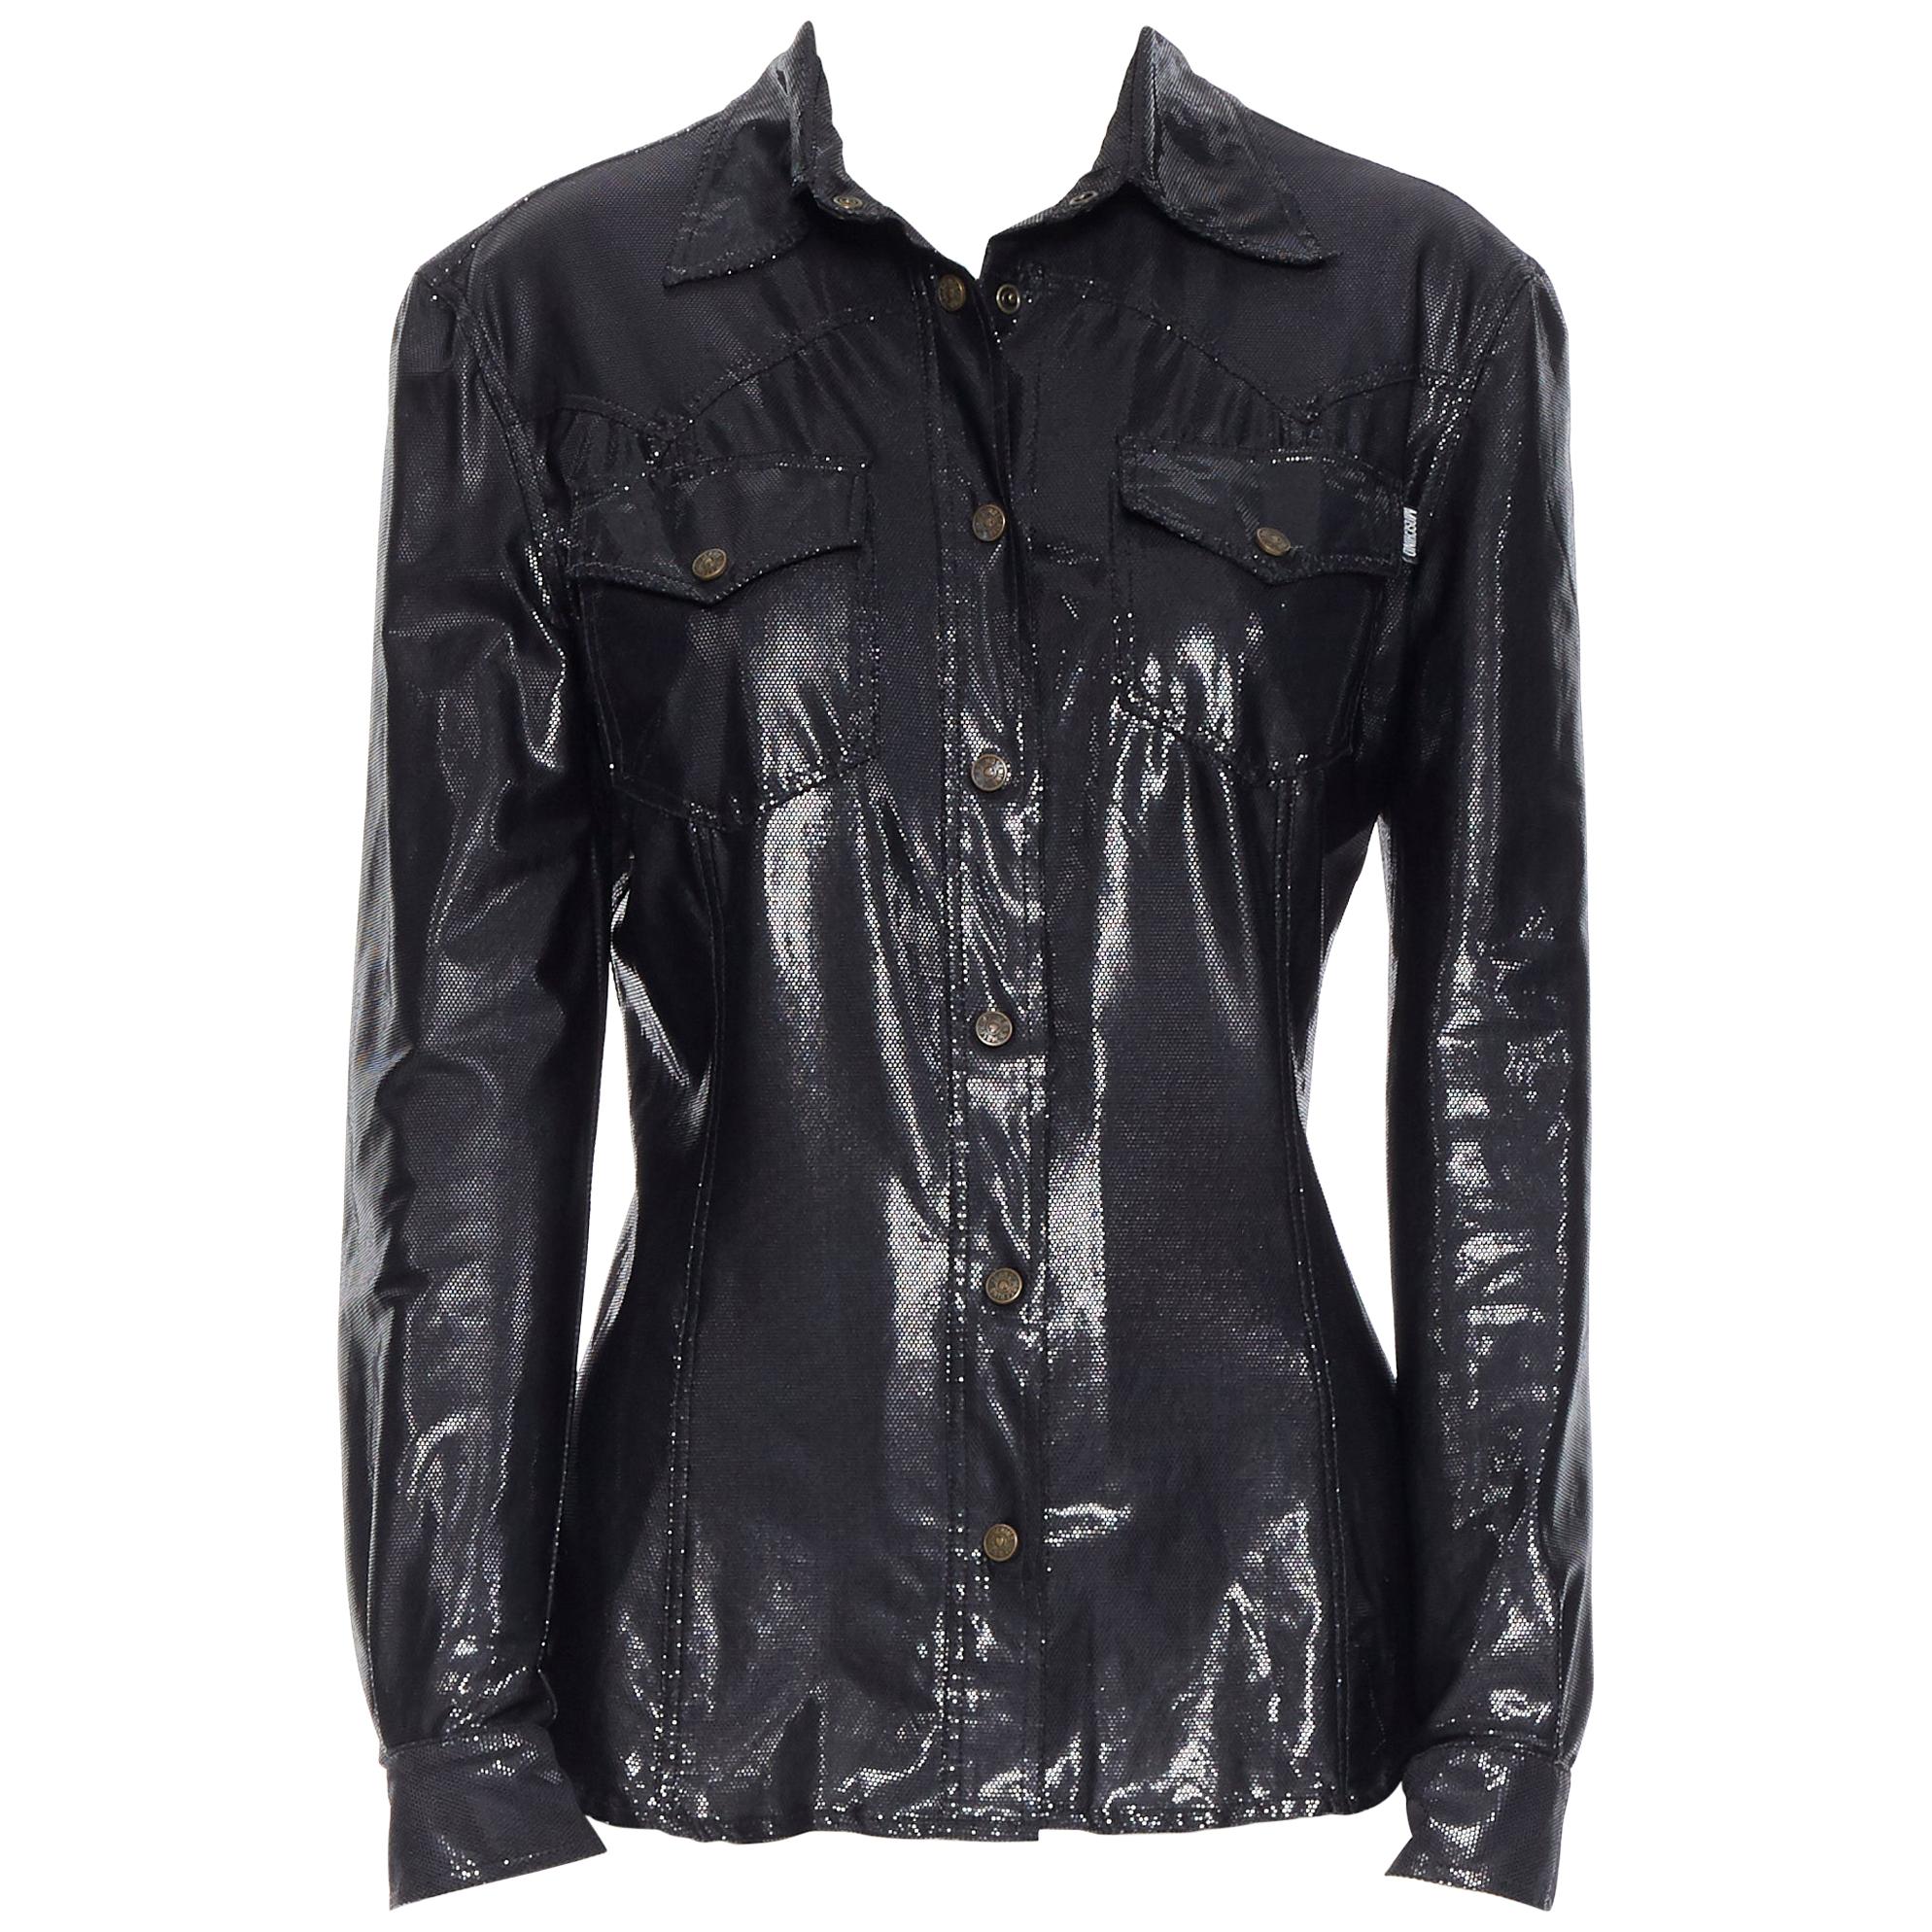 MOSCHINO JEANS black shimmery wet look patched pocket long sleeve shirt S